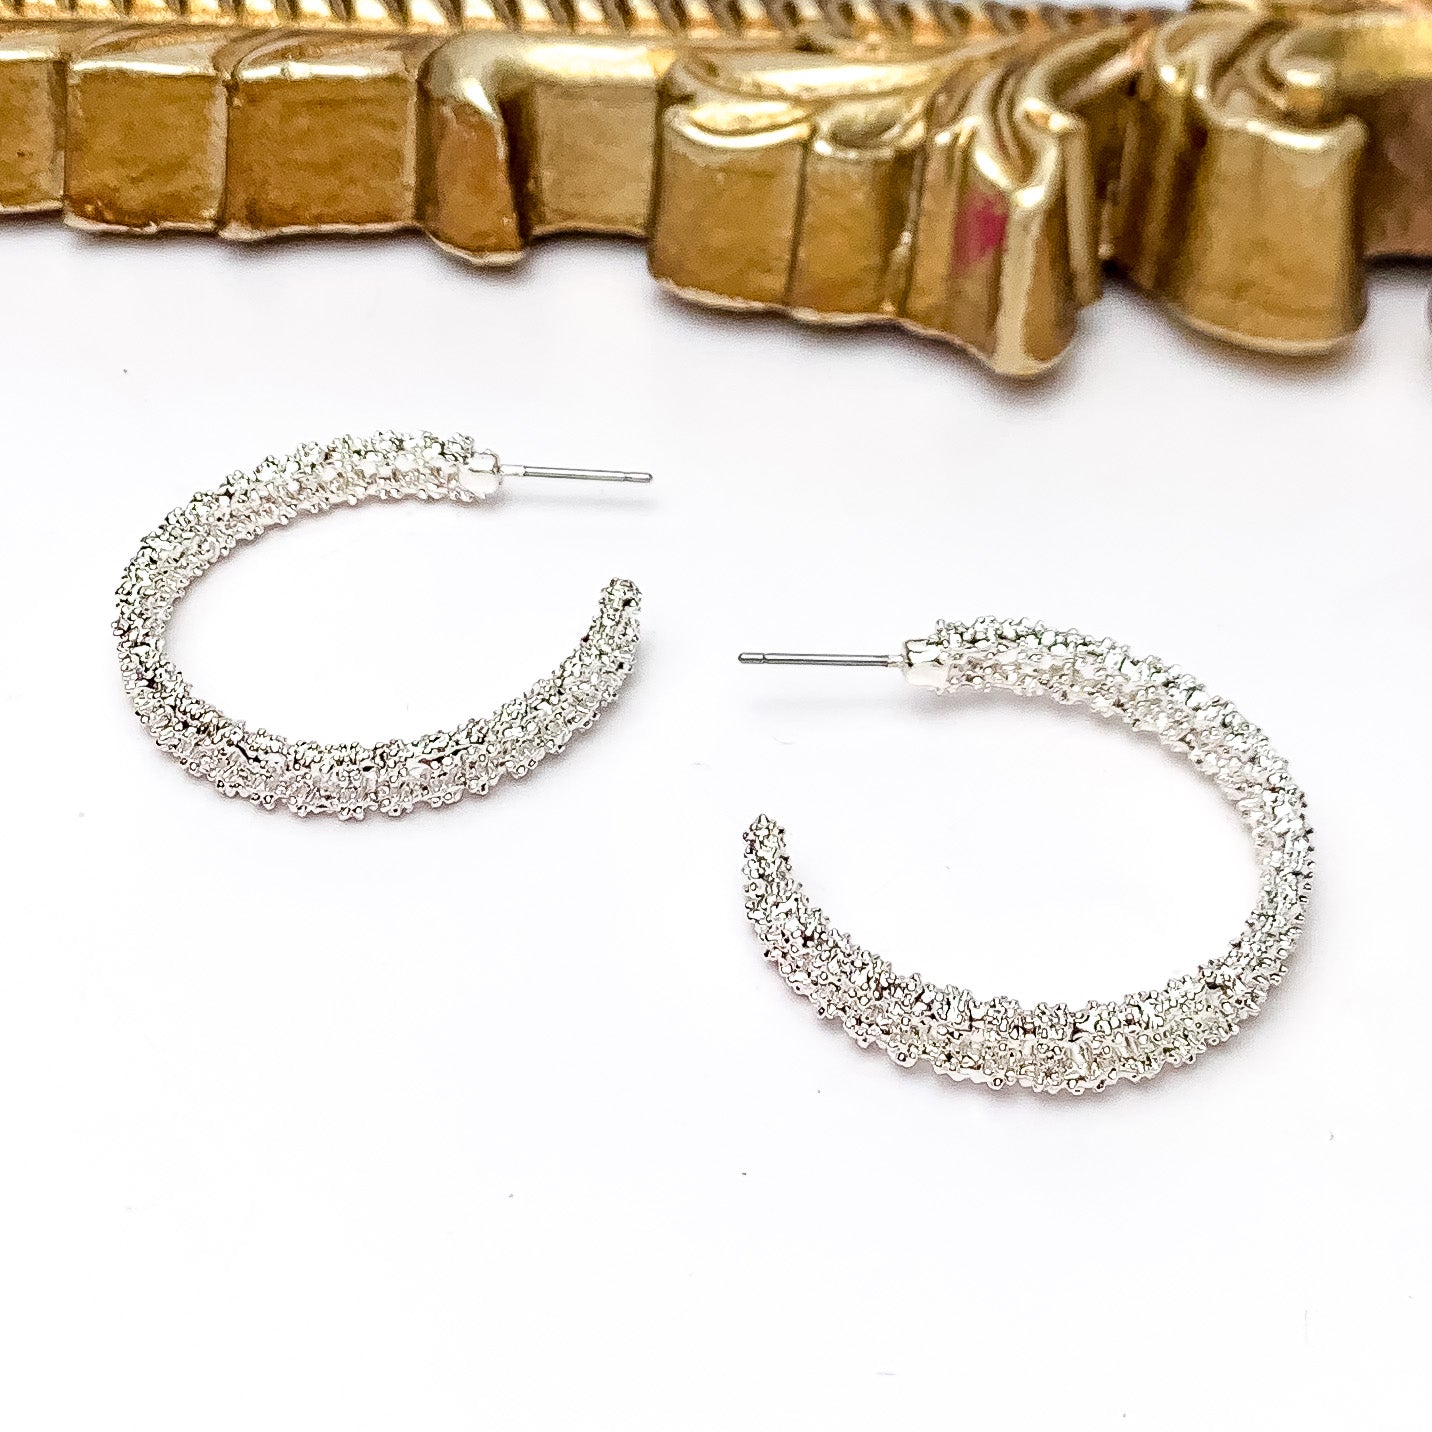 Worry Free Medium Silver Tone Textured Hoop Earrings. Pictured on a white background with a gold frame above the earrings. 